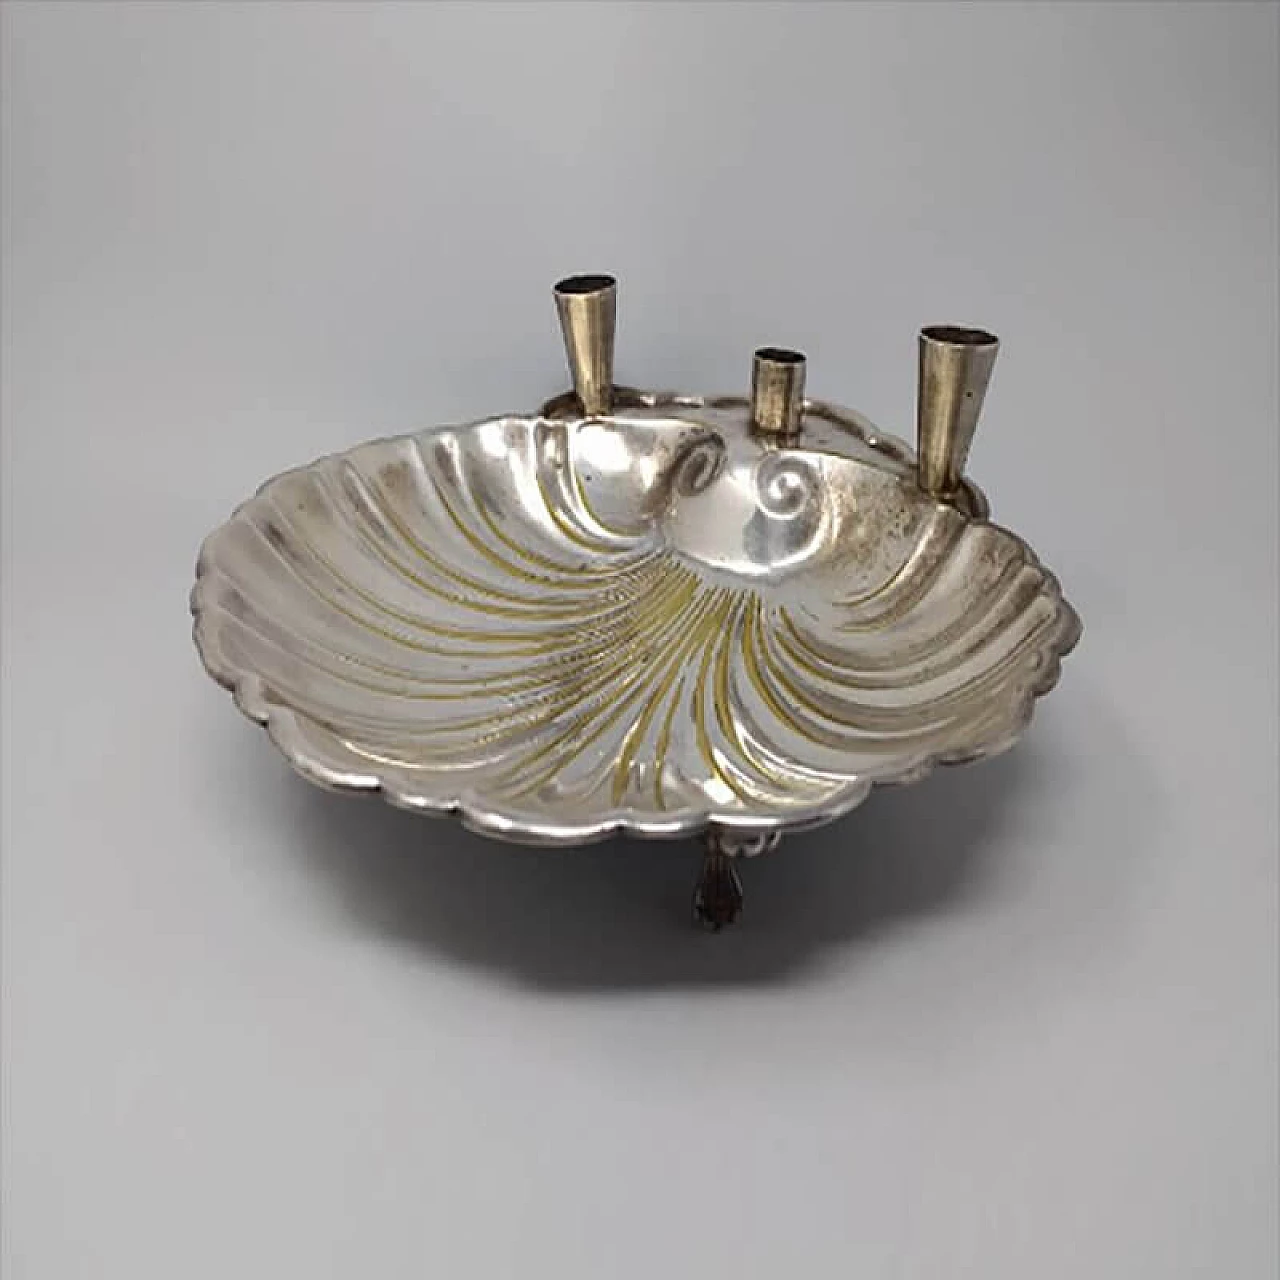 Silver plated candleholder, 1930s 1124550